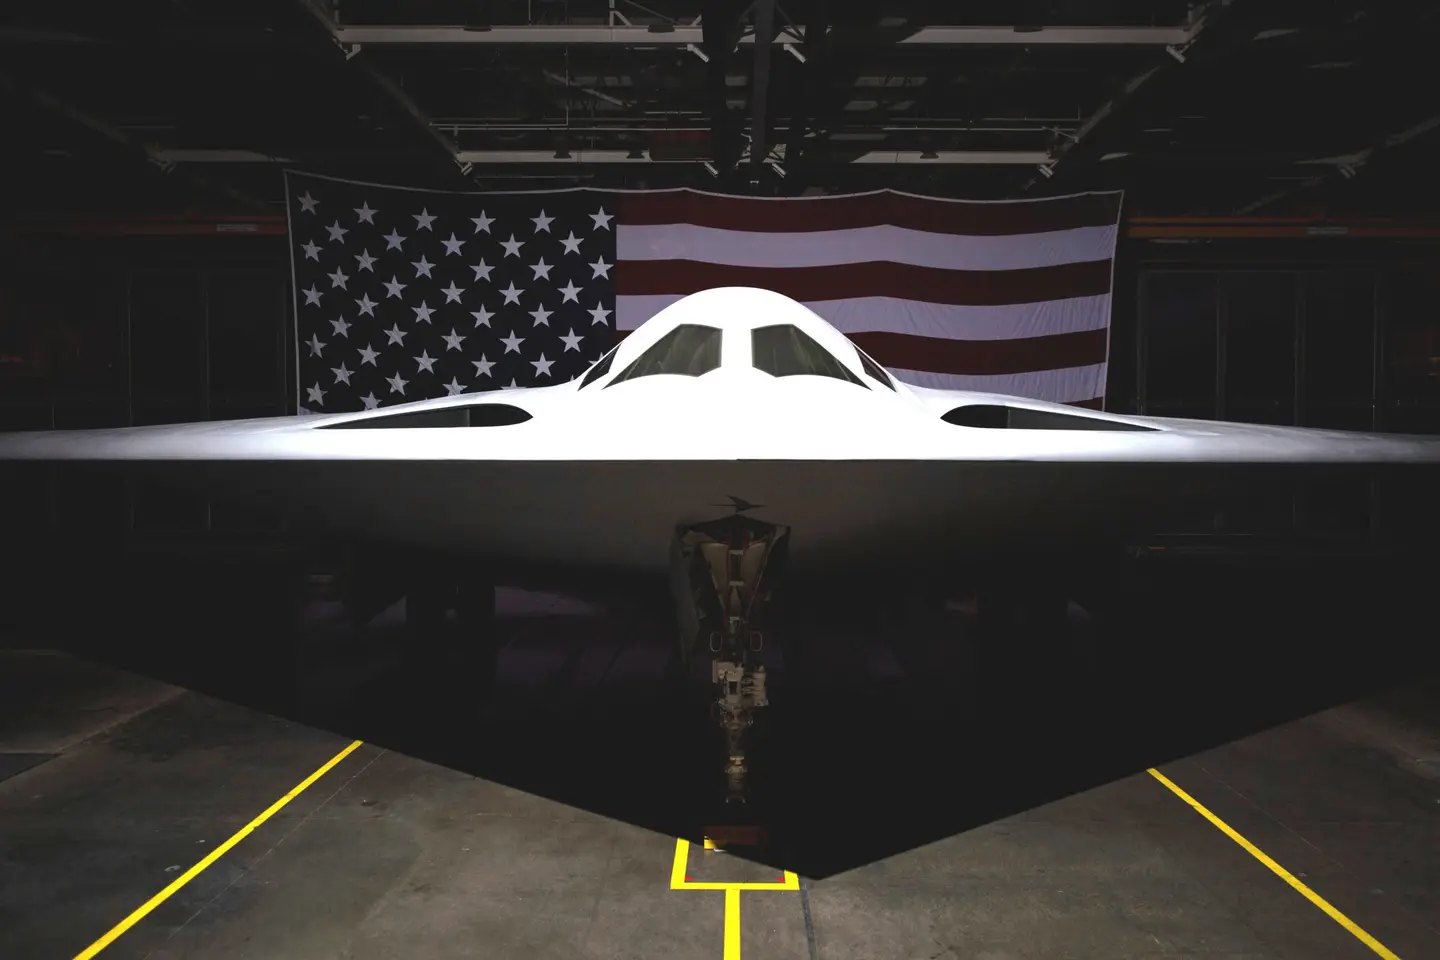 B-21 Raider bombers, Columbia missile cruisers and Sentinel intercontinental ballistic missiles - U.S. working to modernize nuclear triad